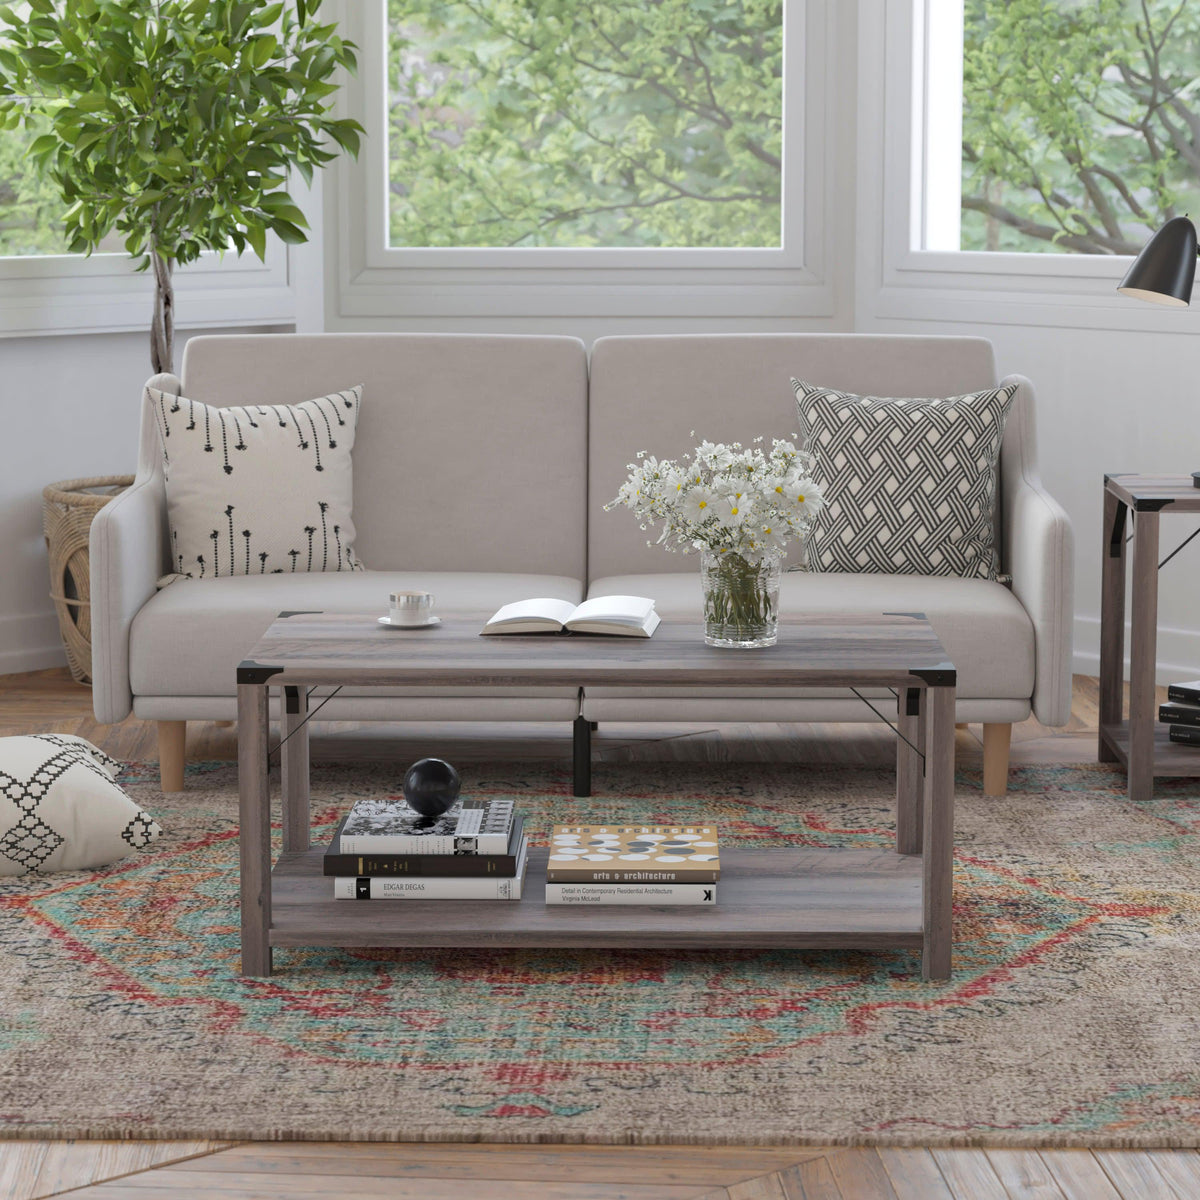 Gray Wash |#| 2-Tier Coffee Table with Black Metal Side Braces and Corner Caps - Gray Wash